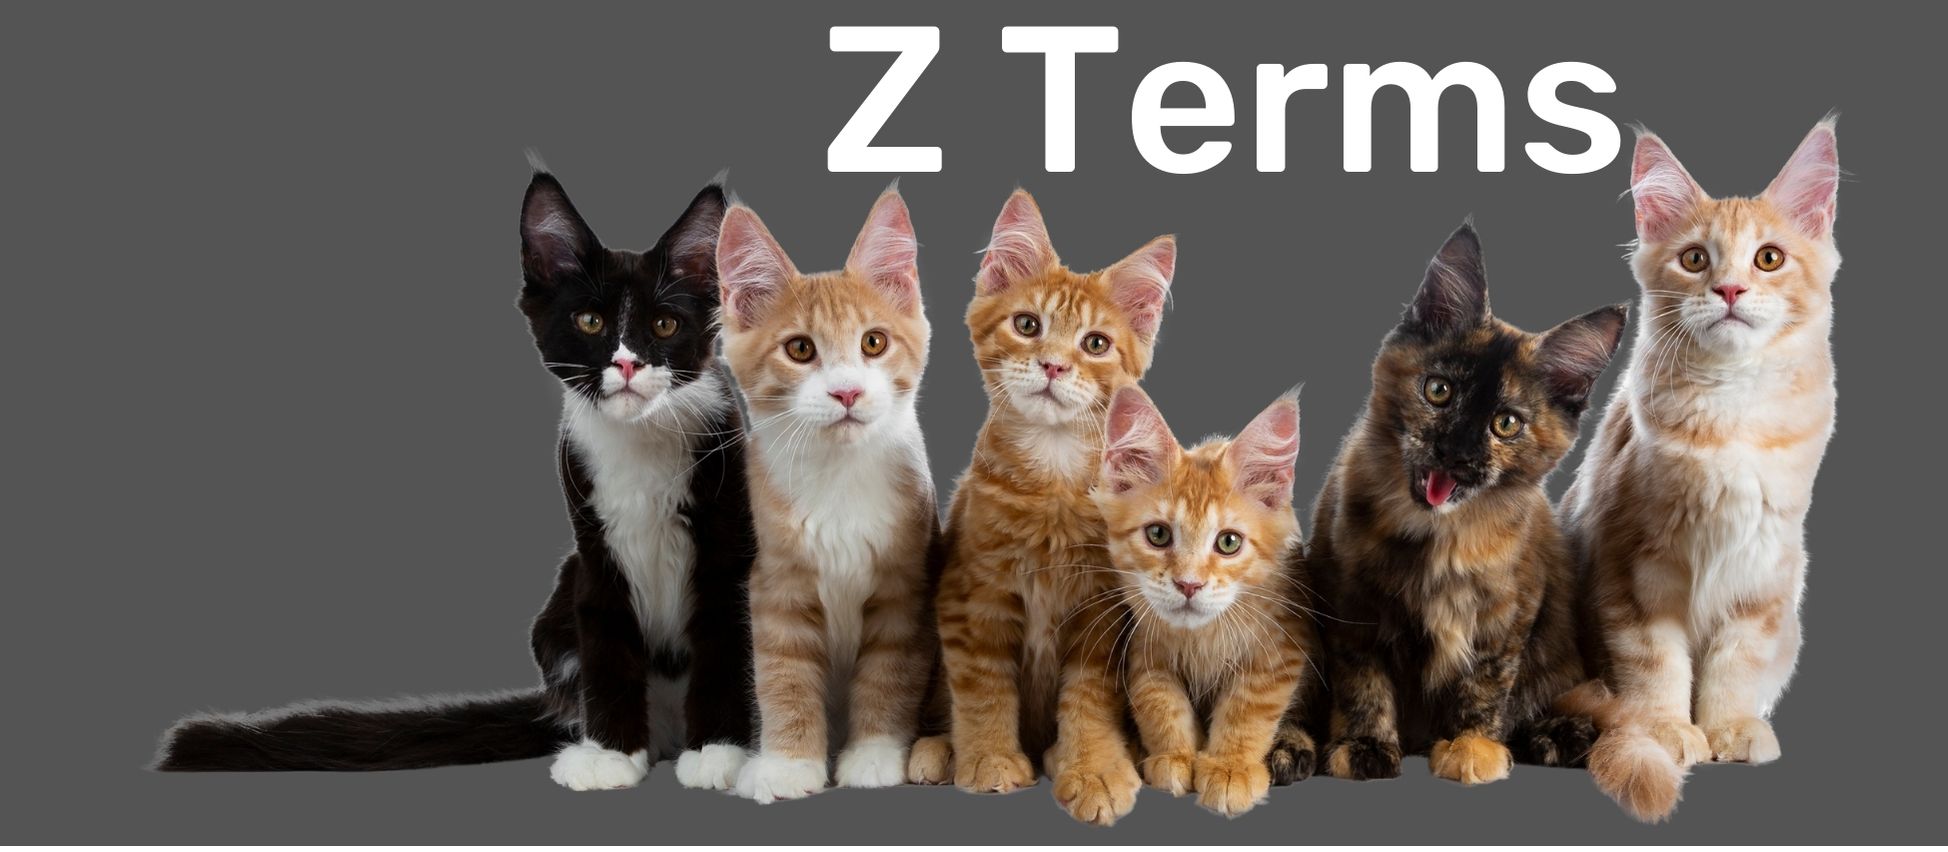 Group of six cats in front of a gray background with text reading 'Z Terms' at the top to indicate a new section of the glossary